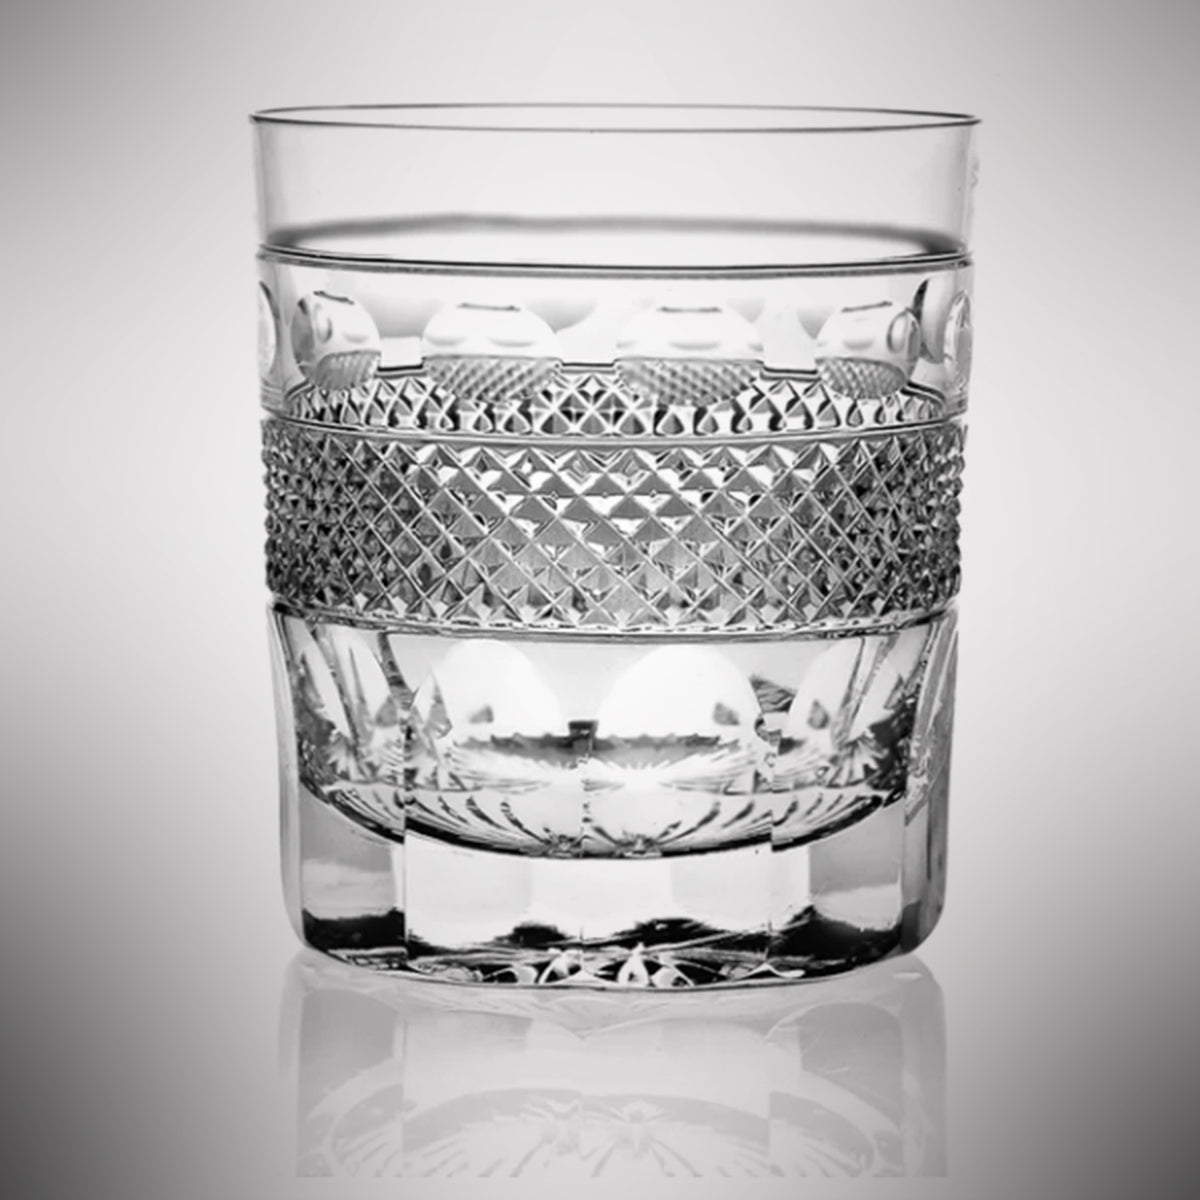 James Bond Grasmere Double Old Fashioned Tumbler - Casino Royale Edition - By Cumbria Crystal